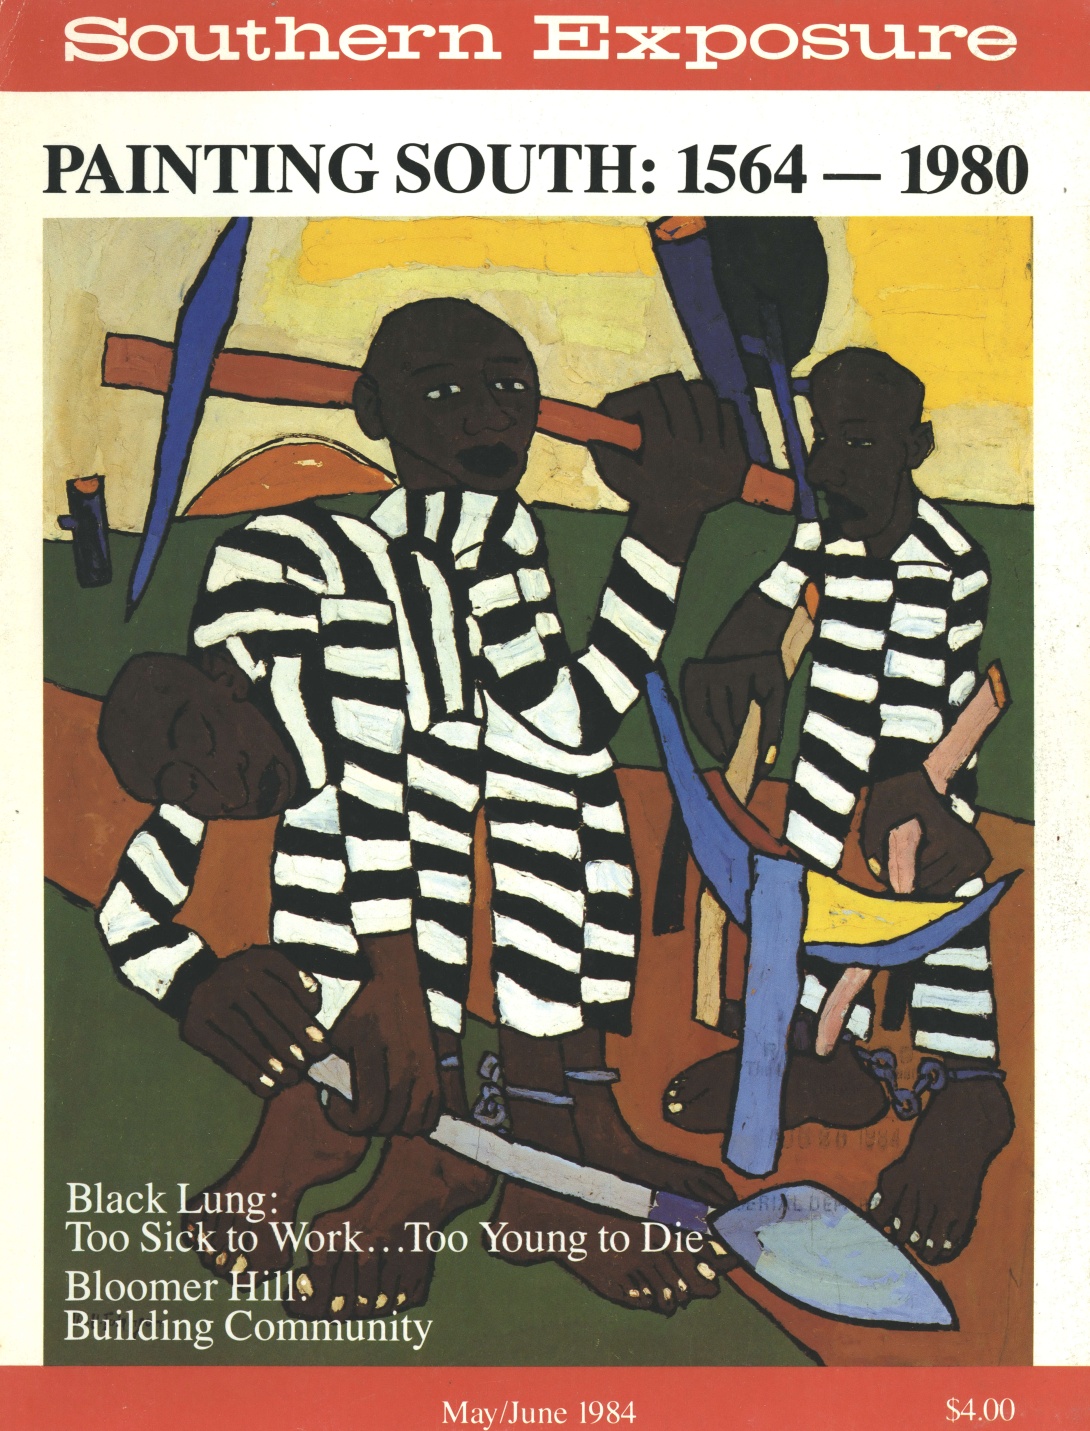 Magazine cover featuring painting of Black men in prison garb working on what appears to be a prison farm